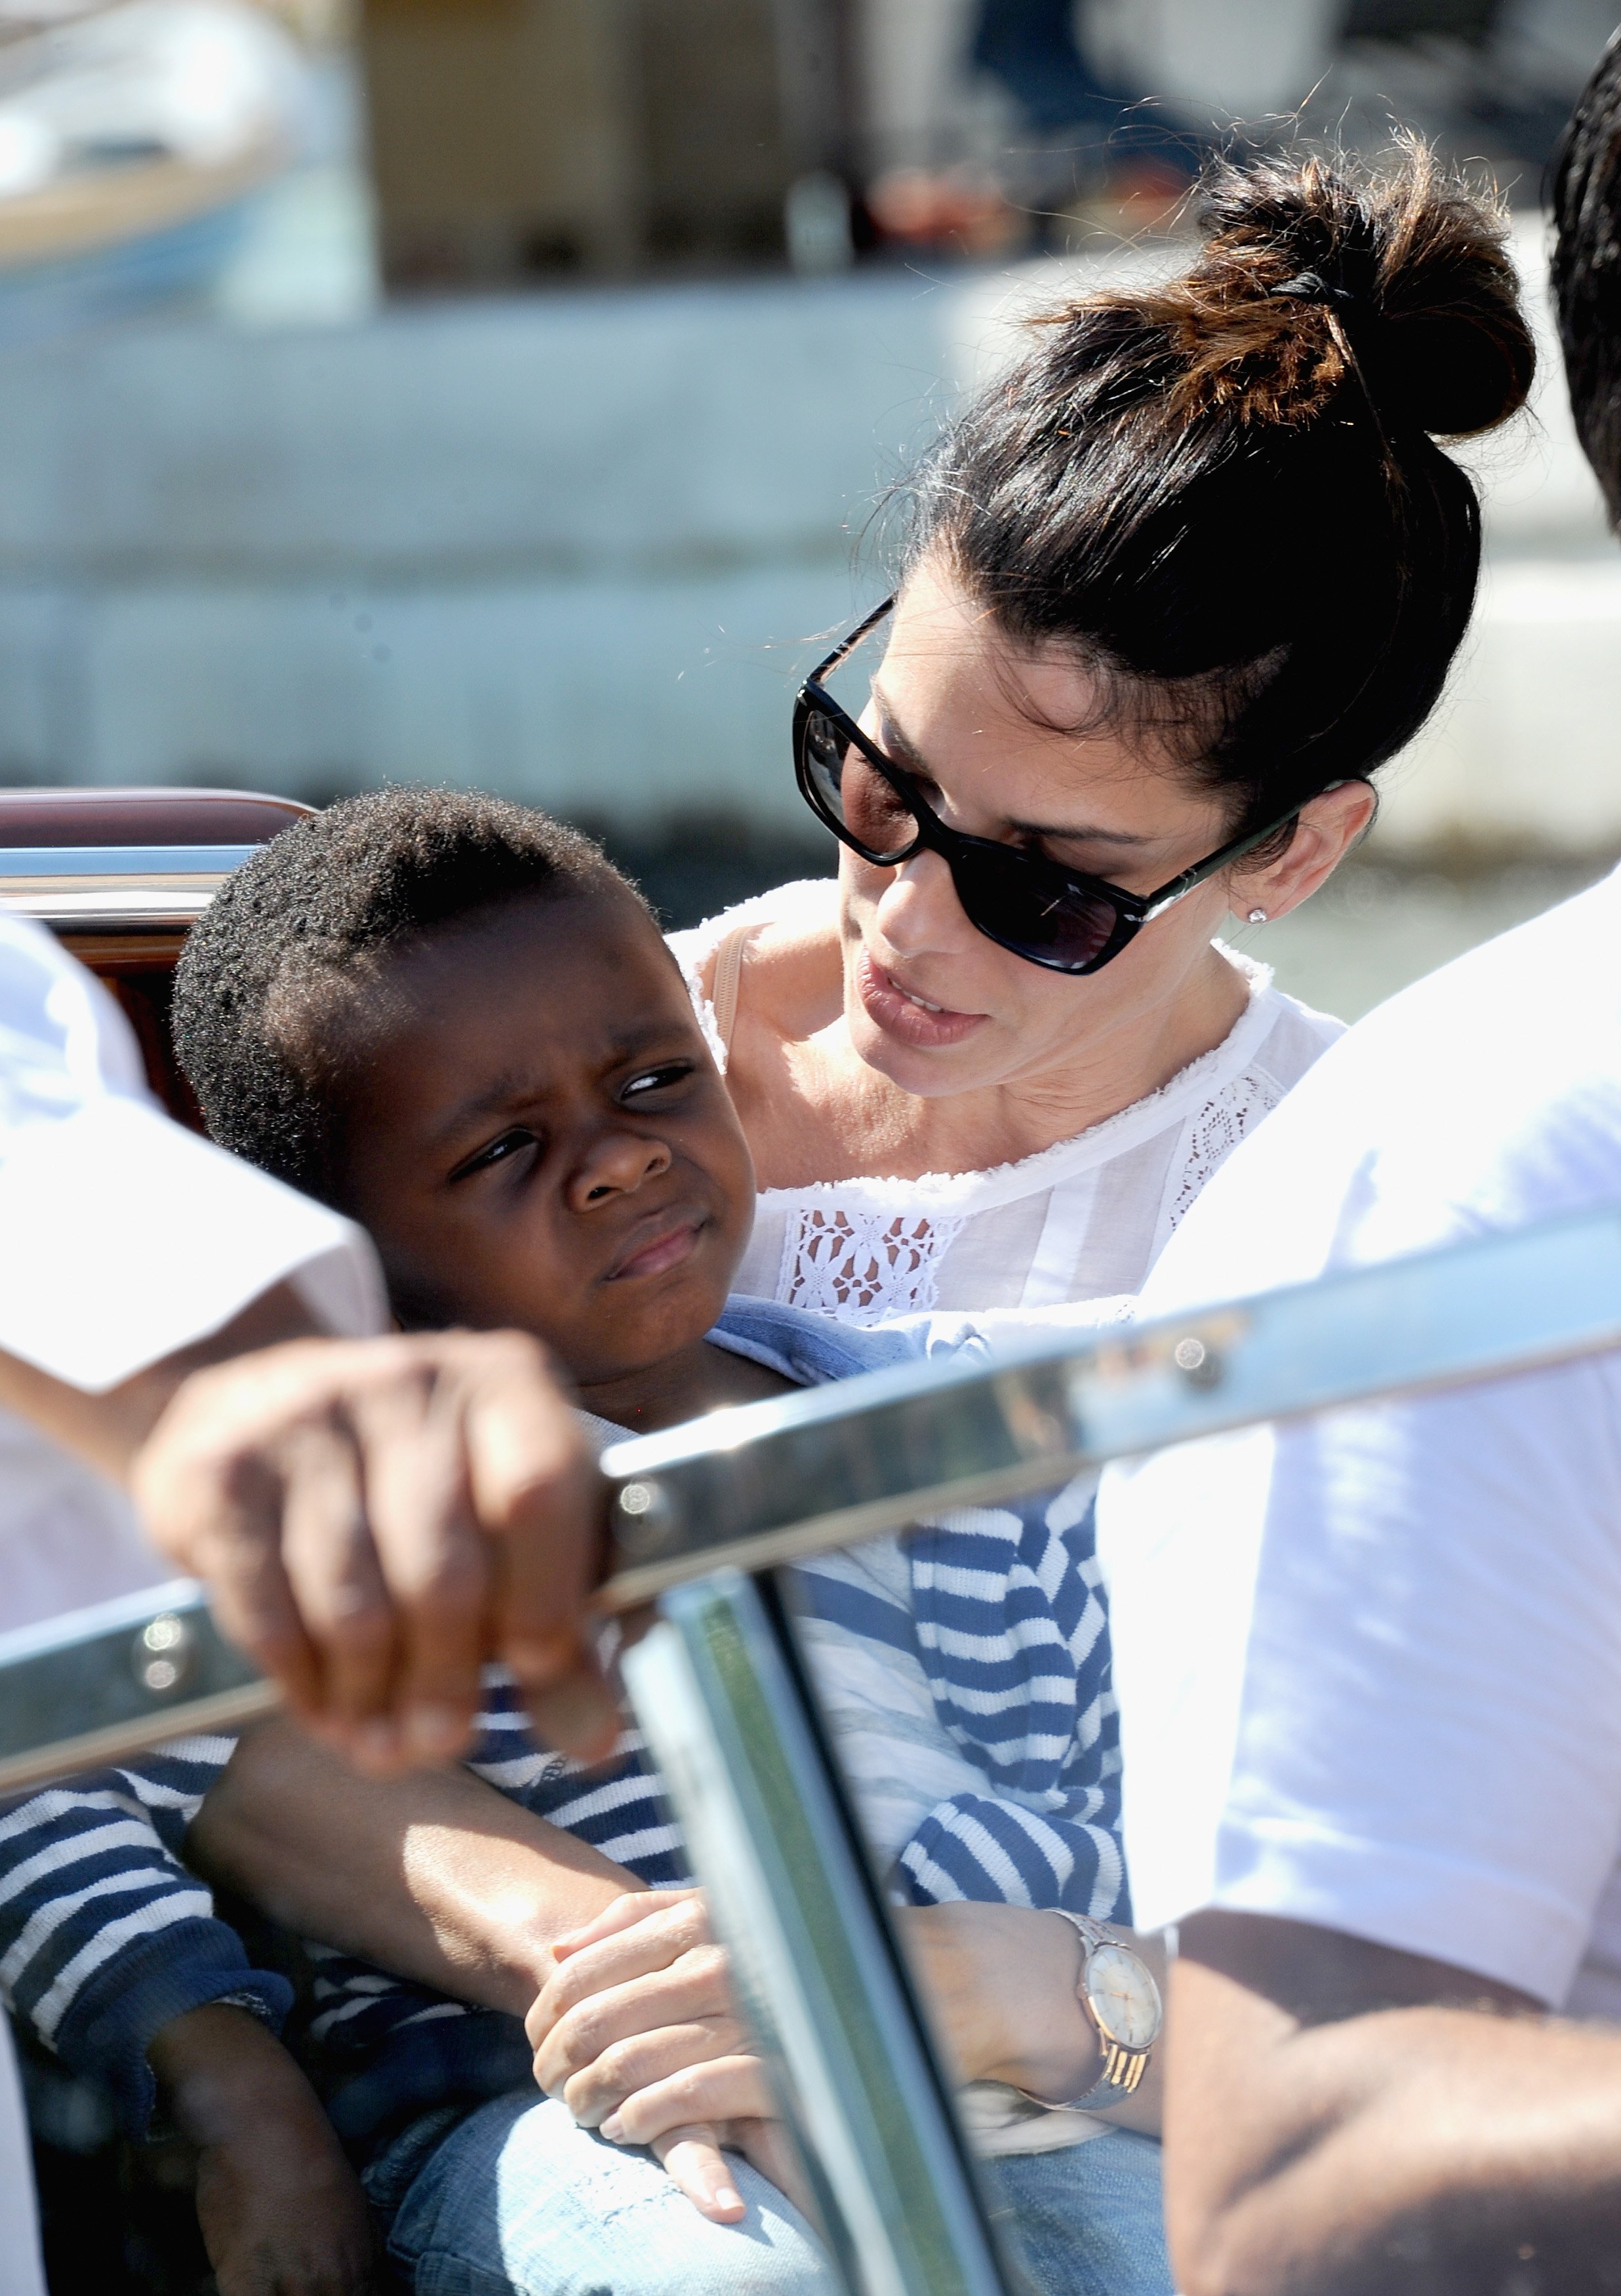 Sandra Bullock and son Louis Bullock during the 70th Venice International Film Festival on August 27, 2013 in Venice, Italy. / Source: Getty Images